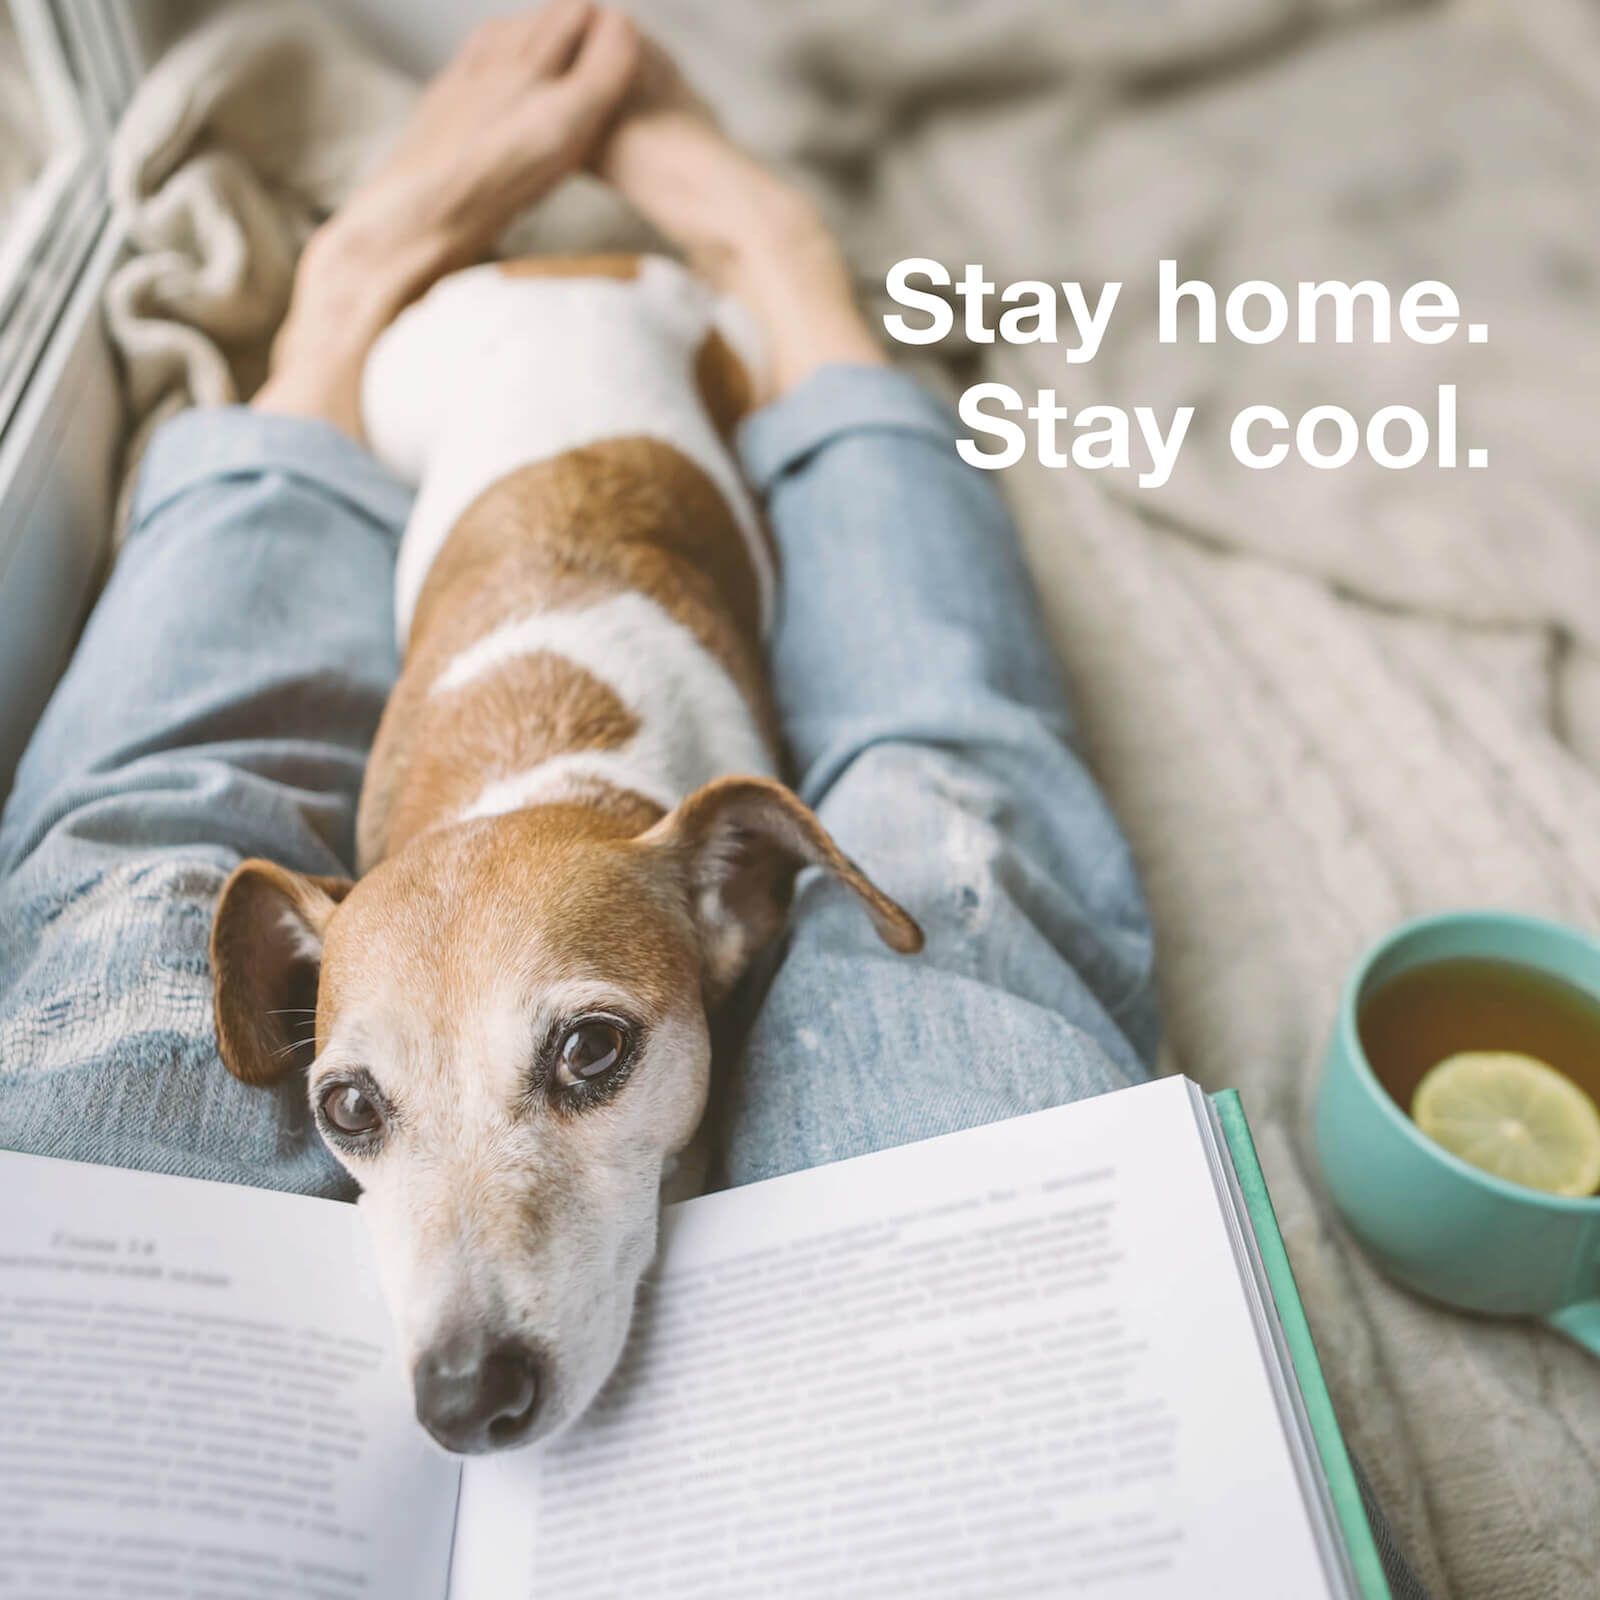 Stay home. Stay cool. #wirbleibenzuhause